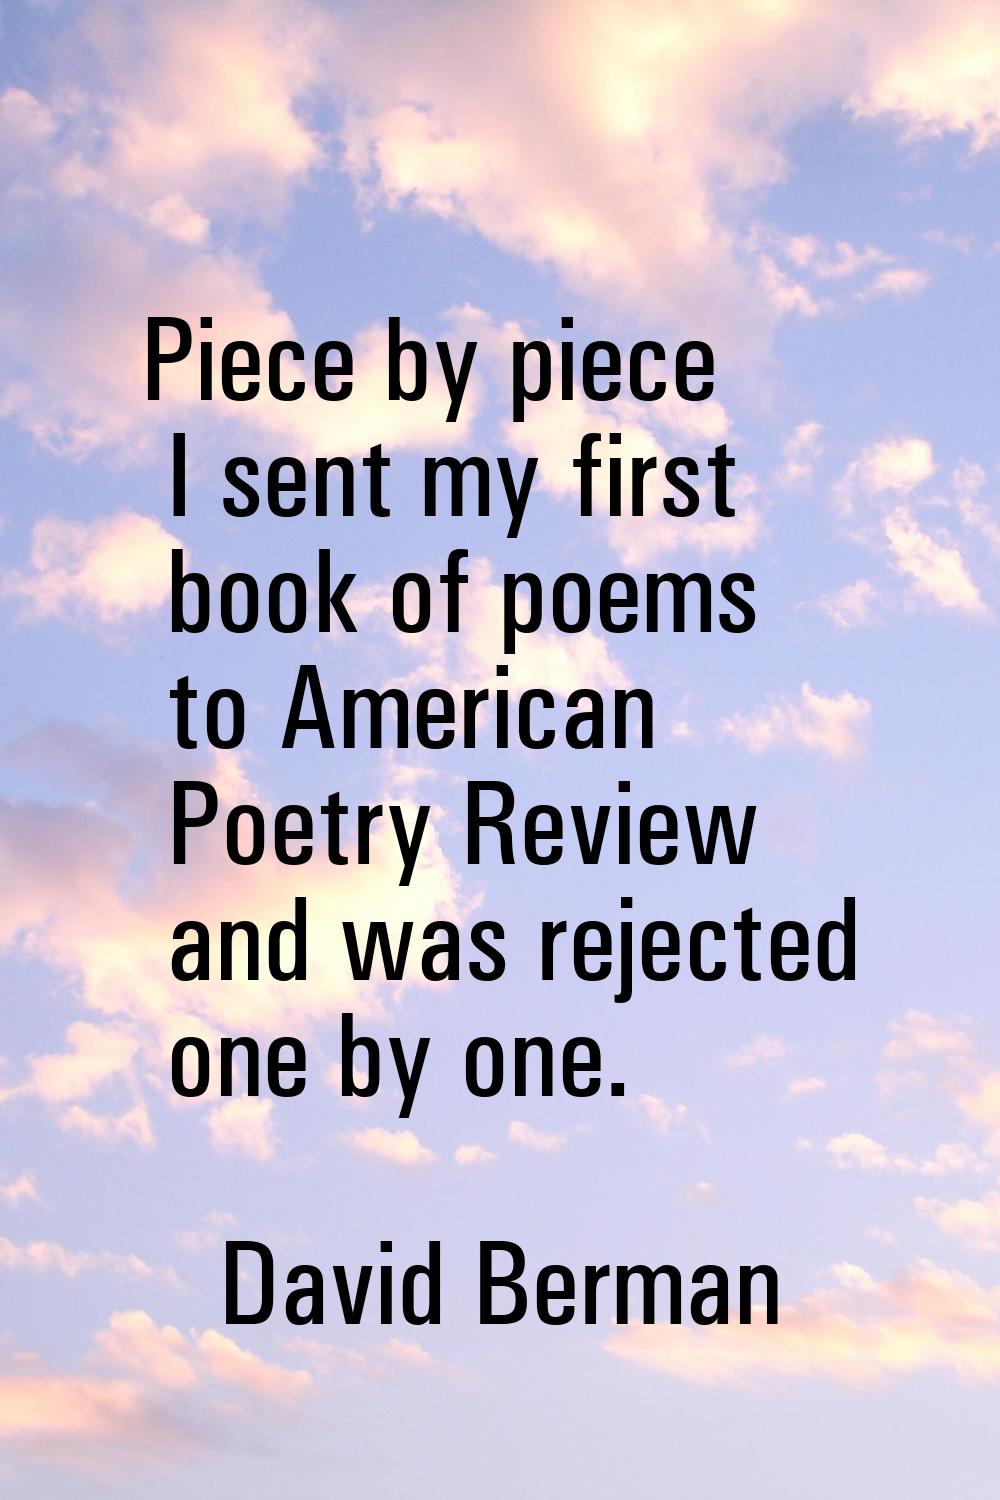 Piece by piece I sent my first book of poems to American Poetry Review and was rejected one by one.